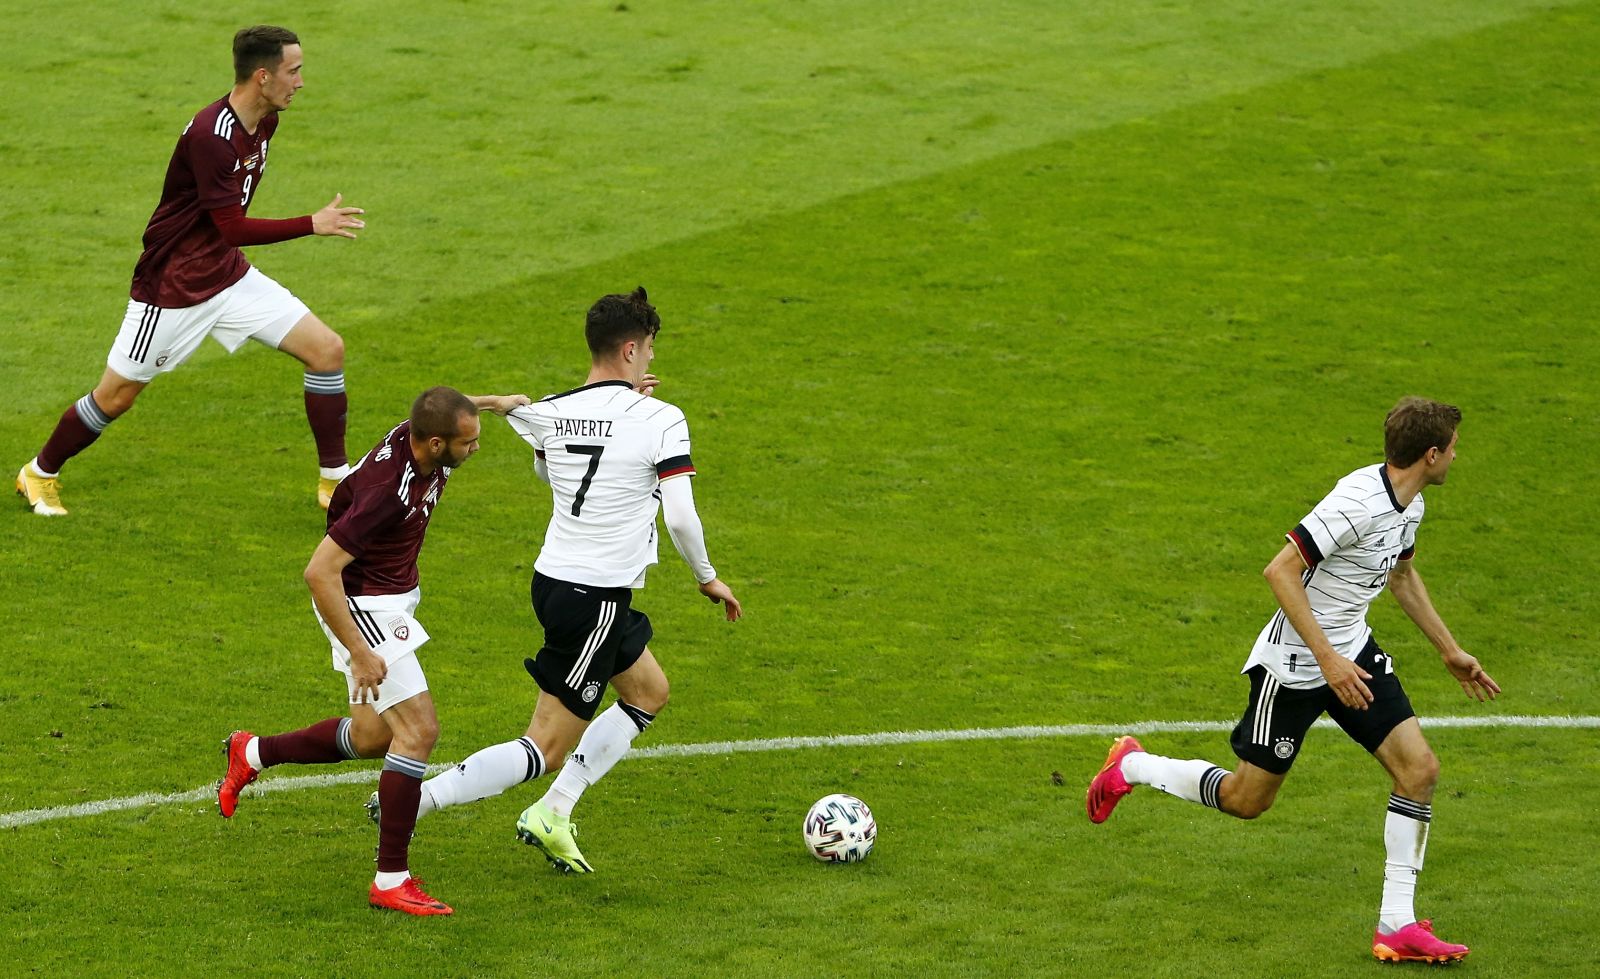 epa09253908 Latvia's Arturs Zjuzins (2-L) in action against Germany's Kai Havertz (C) during the International Friendly soccer match between Germany and Latvia in Duesseldorf, Germany, 07 June 2021.  EPA/THILO SCHMUELGEN / POOL